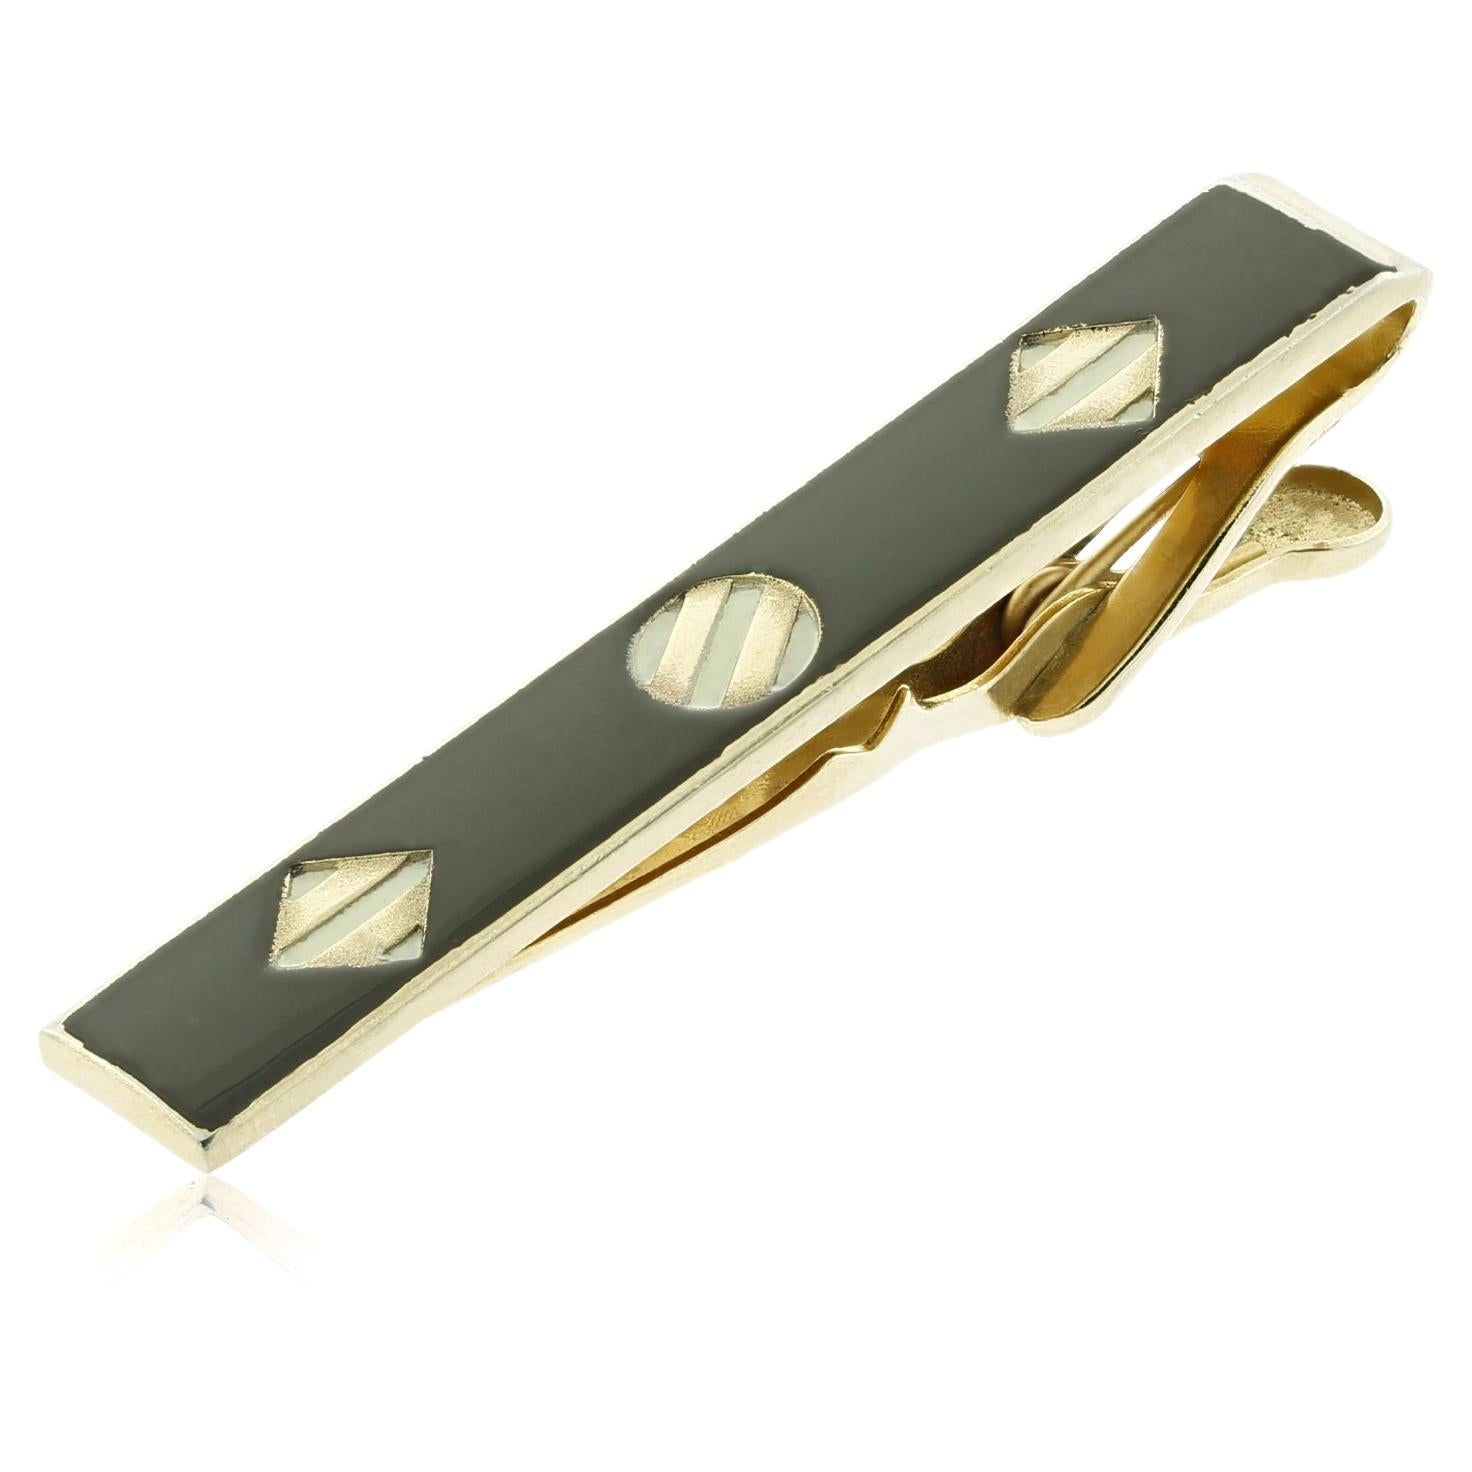 Swank 1960s Art Deco Gold Plated Tie Clip For Sale